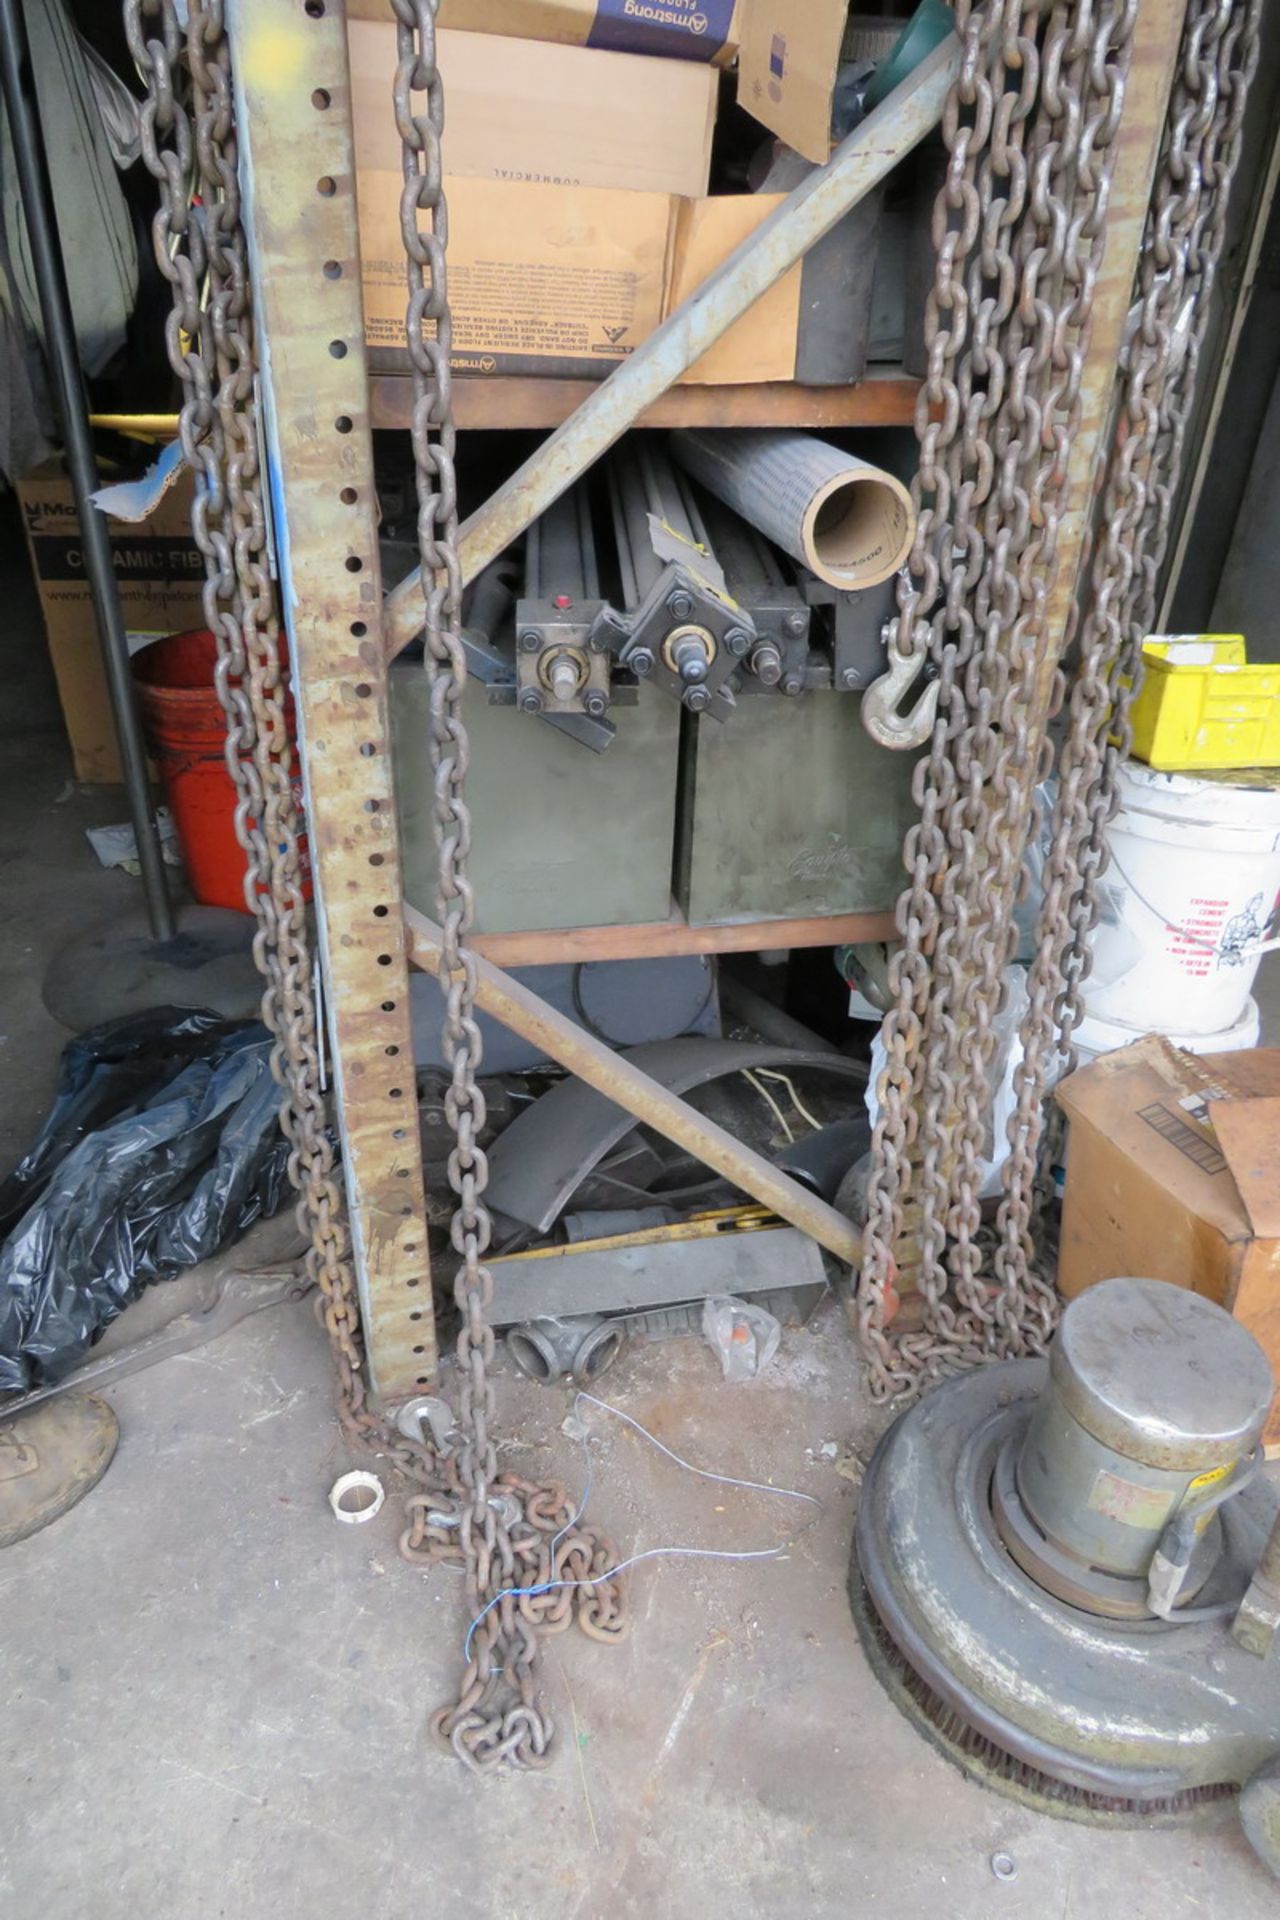 Remaining Contents of Heat Treat Spare Parts Room - Image 29 of 30